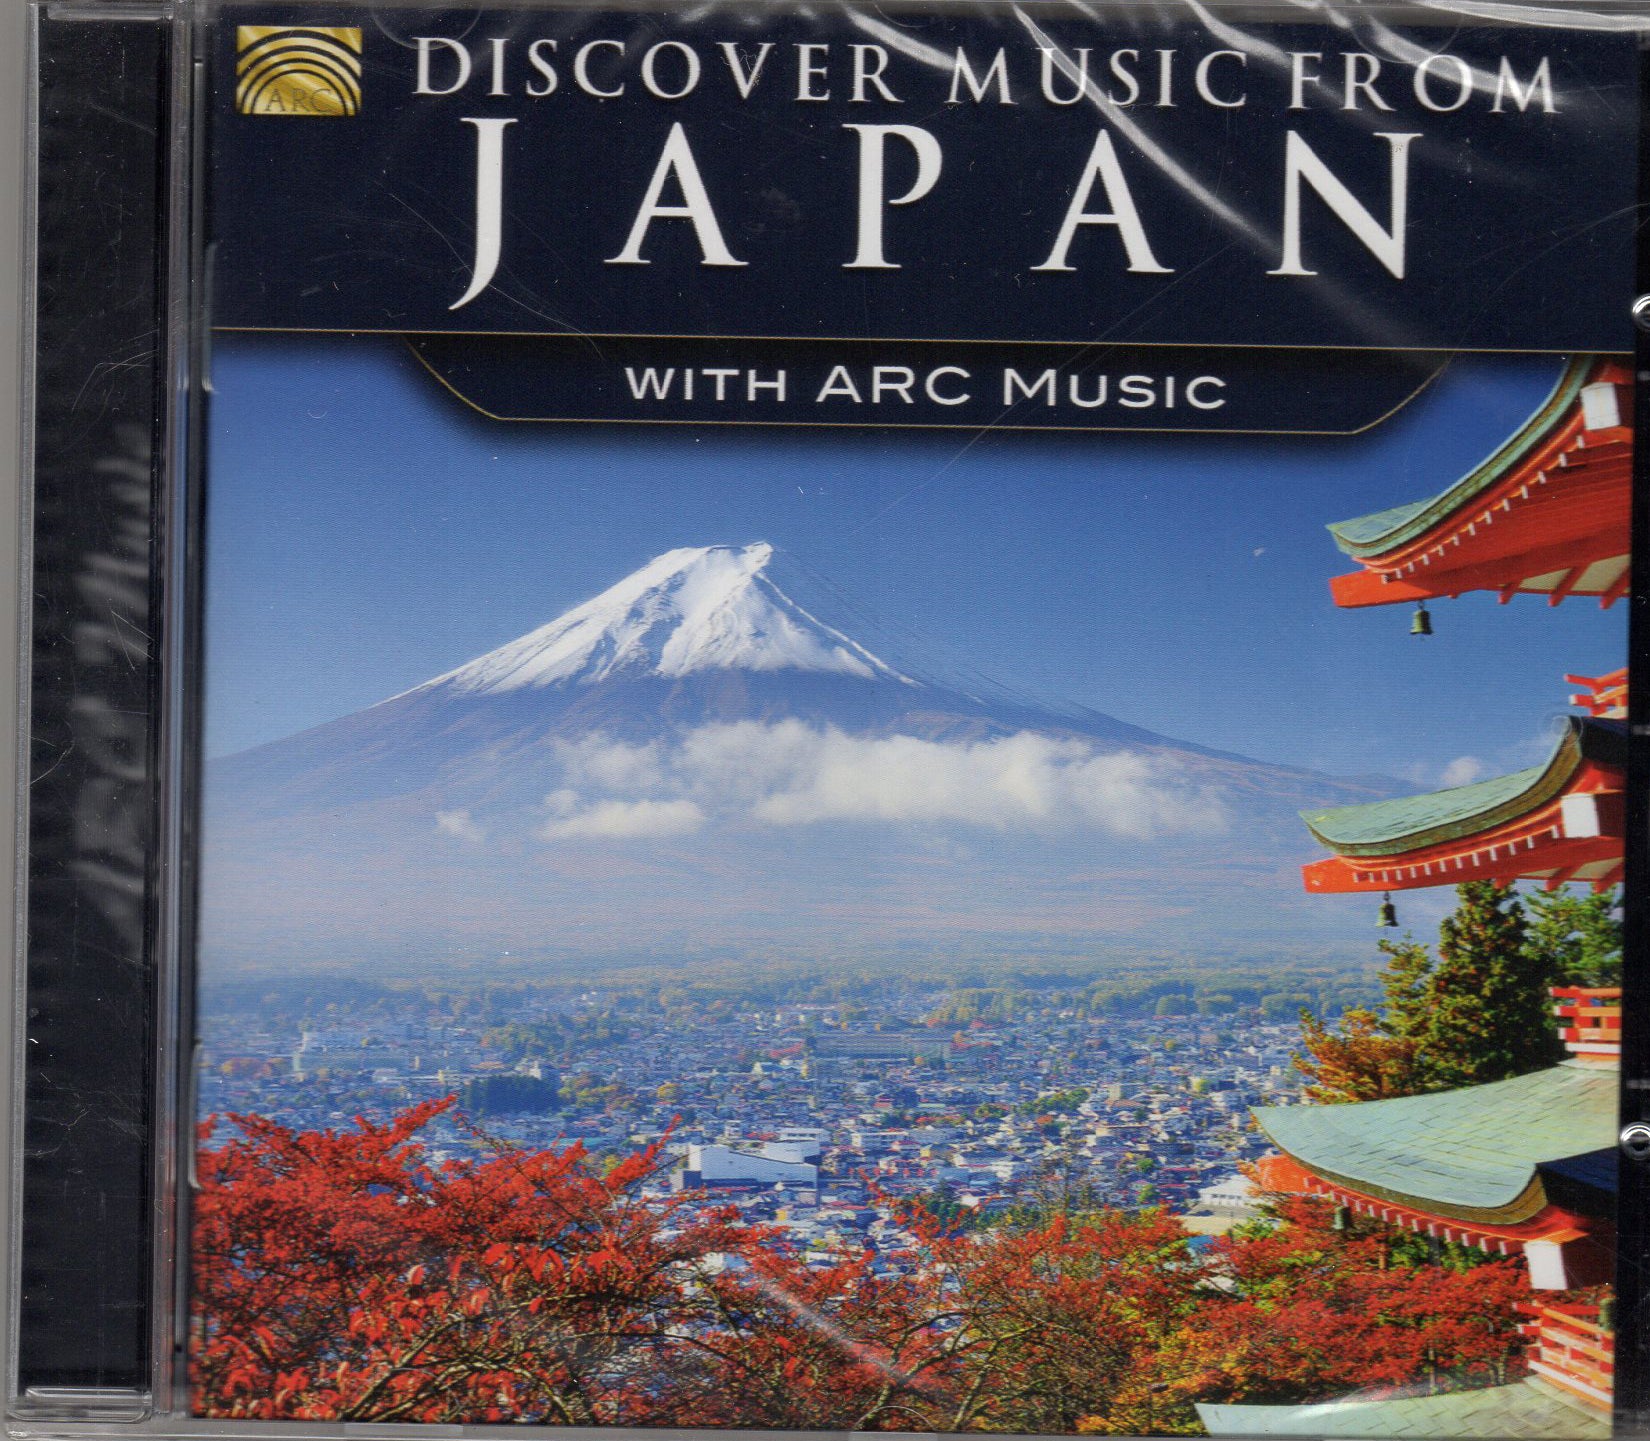 Discover music from Japan